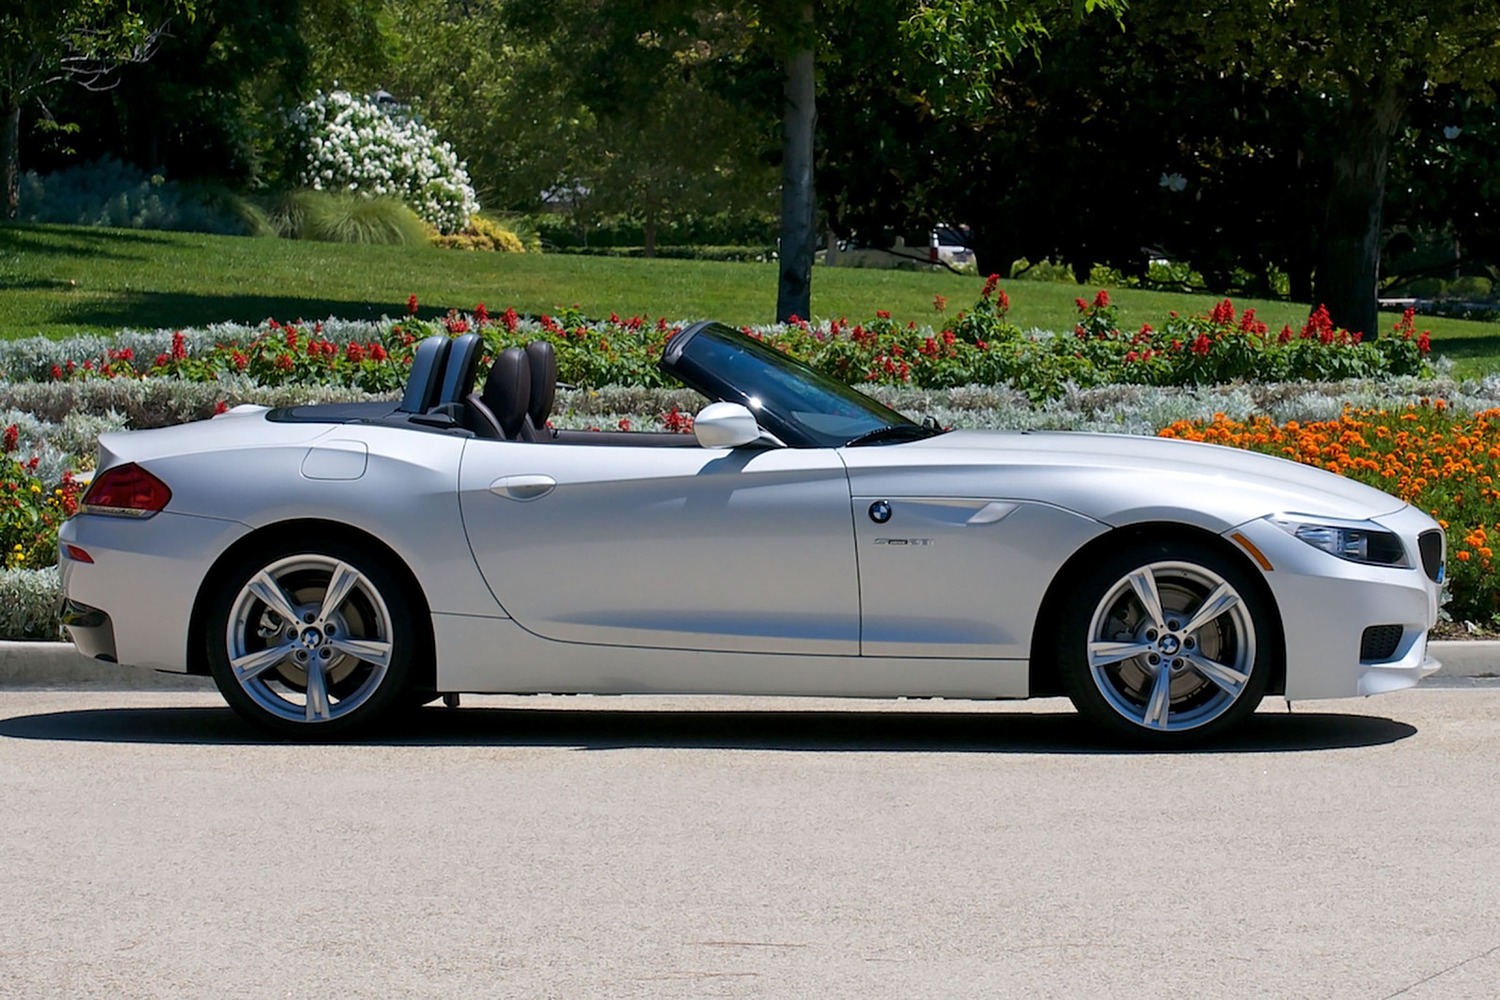 BMW Z4 sDrive28i Convertible Exterior (2012 model year shown)